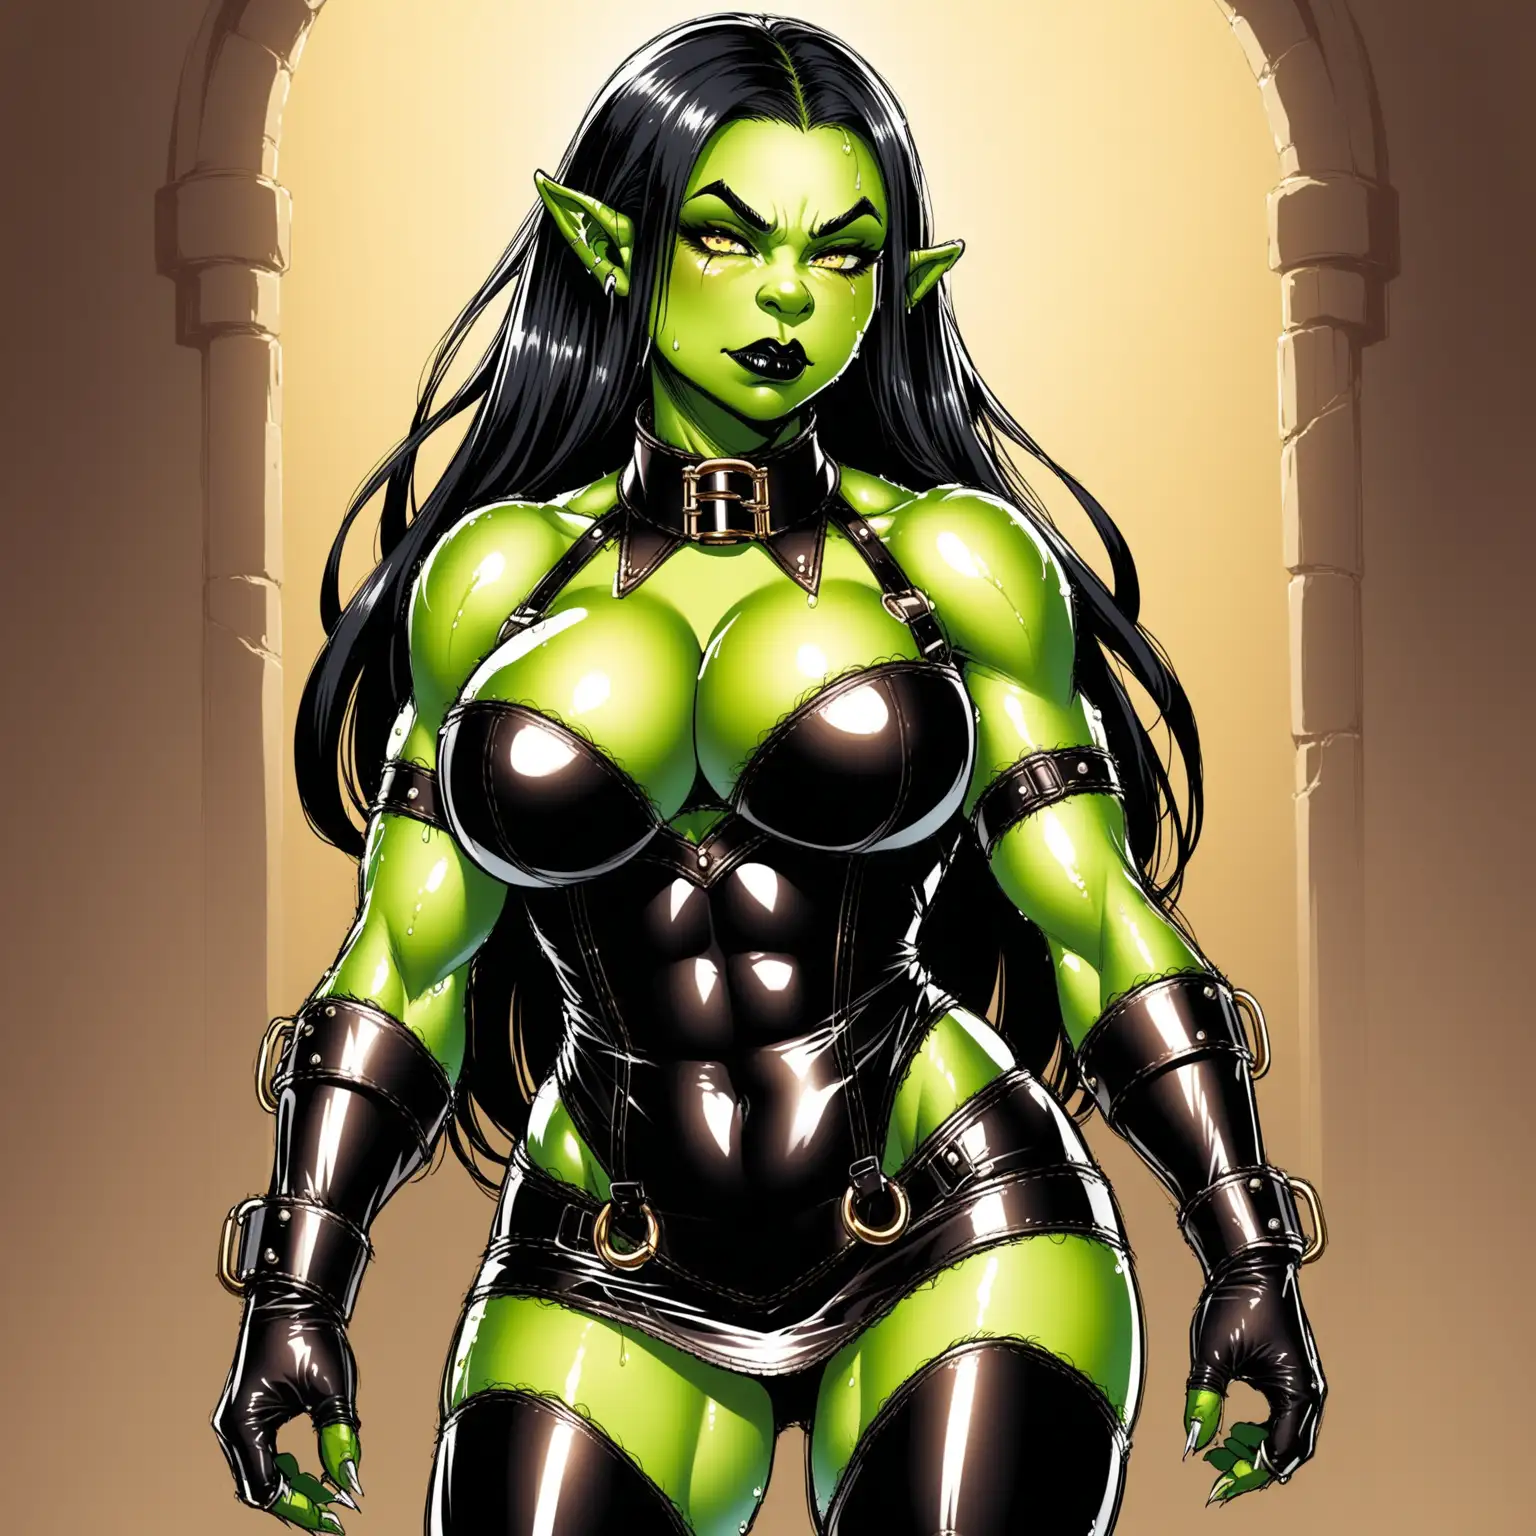 The Orc woman has green skin, long black wavy hair, orc tusks, gold eyes, huge tits G cups, she is muscular and very beautiful and 40 years old. She has shiny black lipstick. She is wearing a shiny black latex corset, miniskirt, long gloves, thigh high boots and a bondage posture collar with a ring. She is in a mansion. She is not sweaty or wet. She has no body hair.  She doesn't look like a monster. 